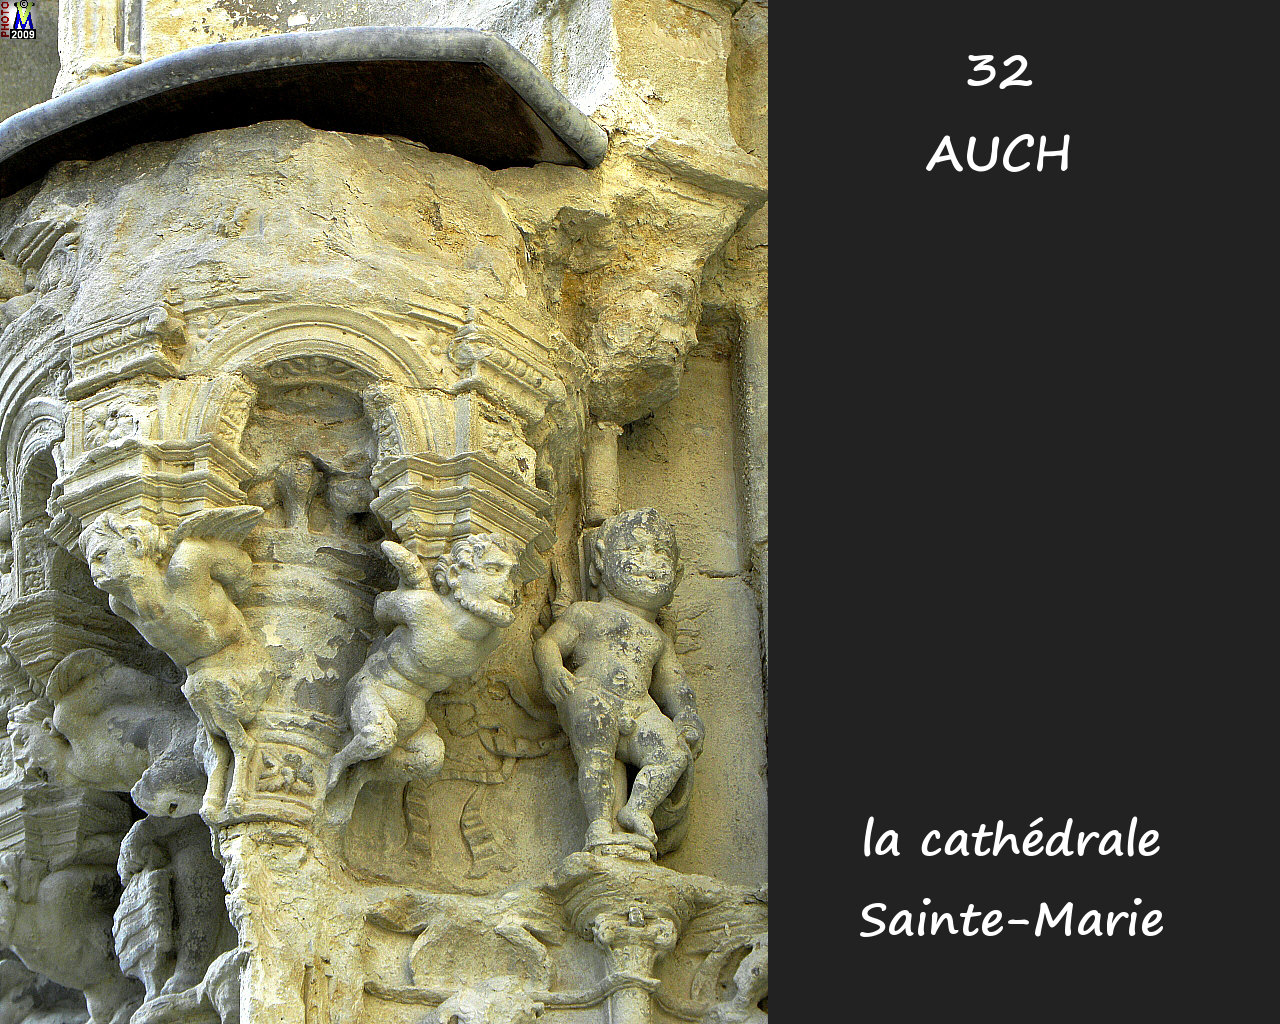 32AUCH_cathedrale_134.jpg